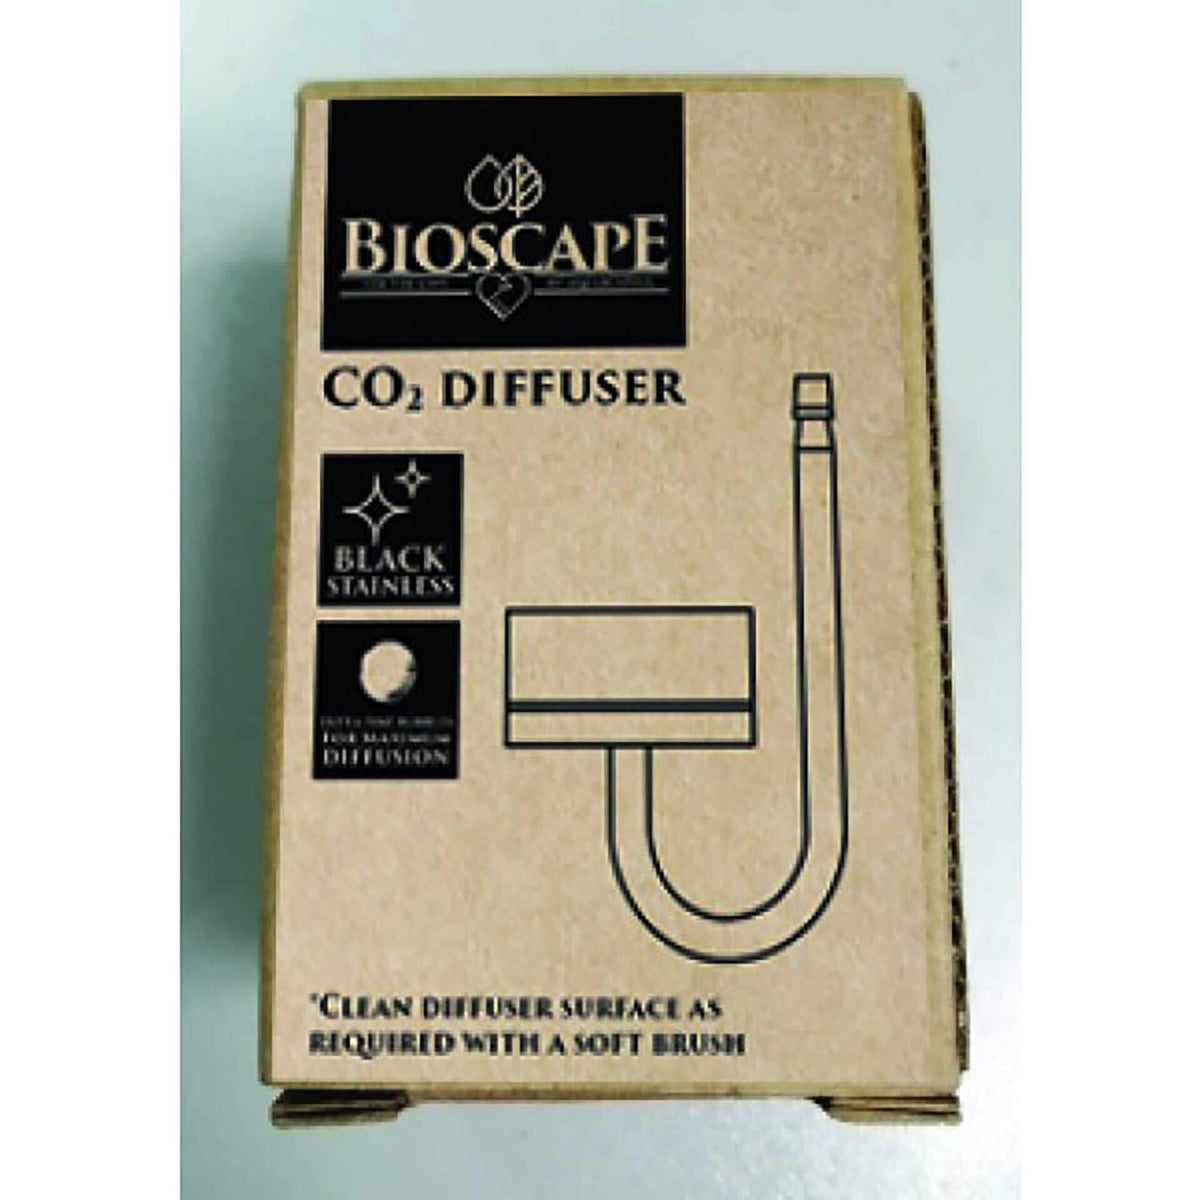 Bioscape CO2 Diffuser - Stainless Steel